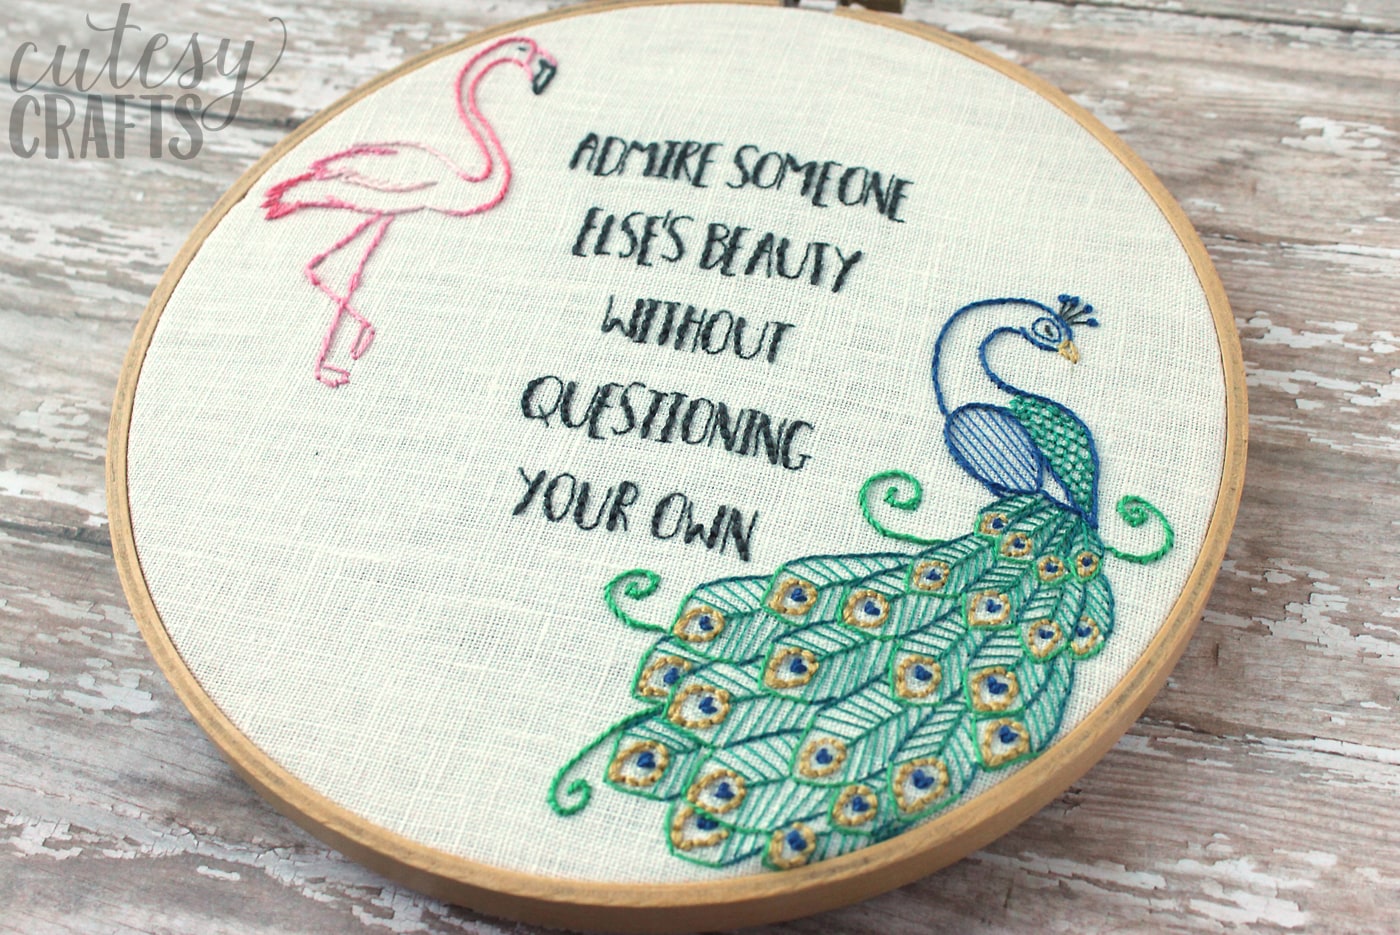 Flamingo and Peacock Free Embroidery Pattern - Quote embroidery "Admire Someone else's beauty without questioning your own" #embroiderypattern #freeembroiderypattern #flamingo #peacock #embroiderypatternquote